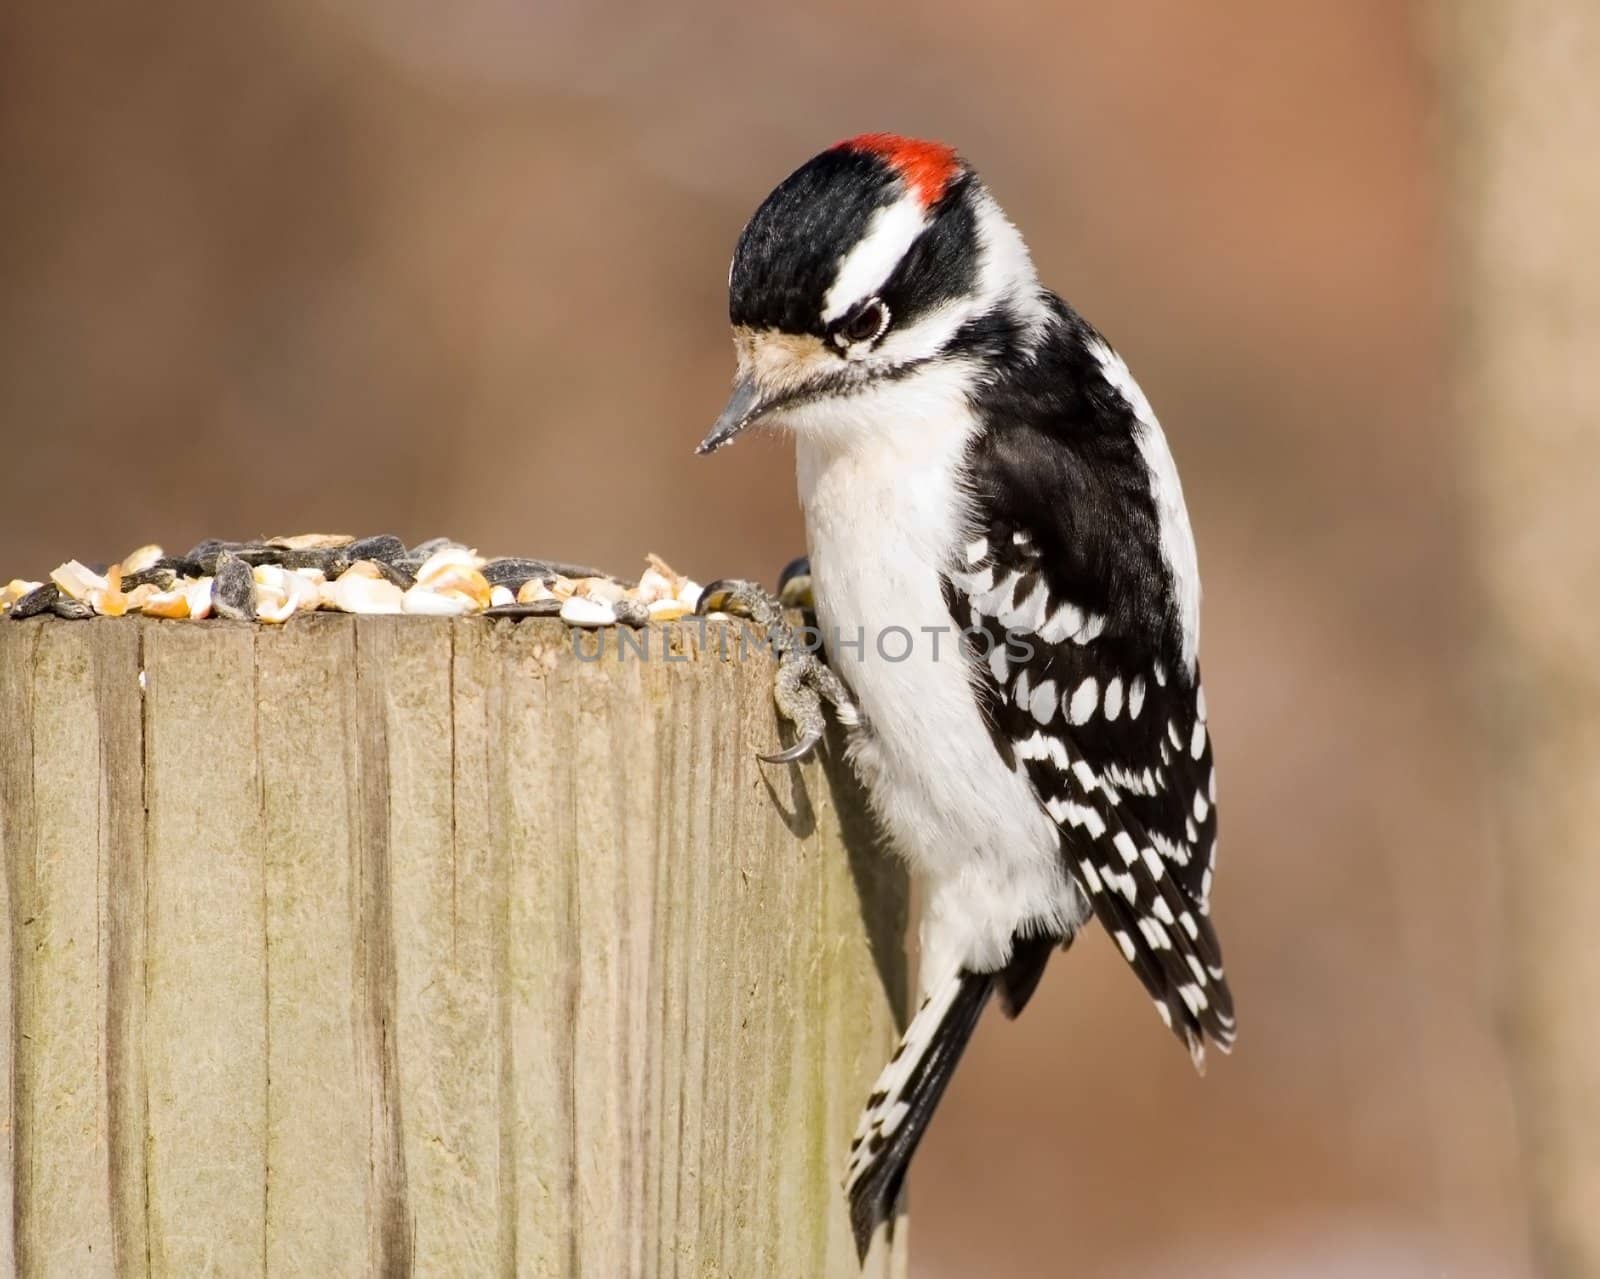 A male downy woodpecker perched on a wooden post with bird seed.